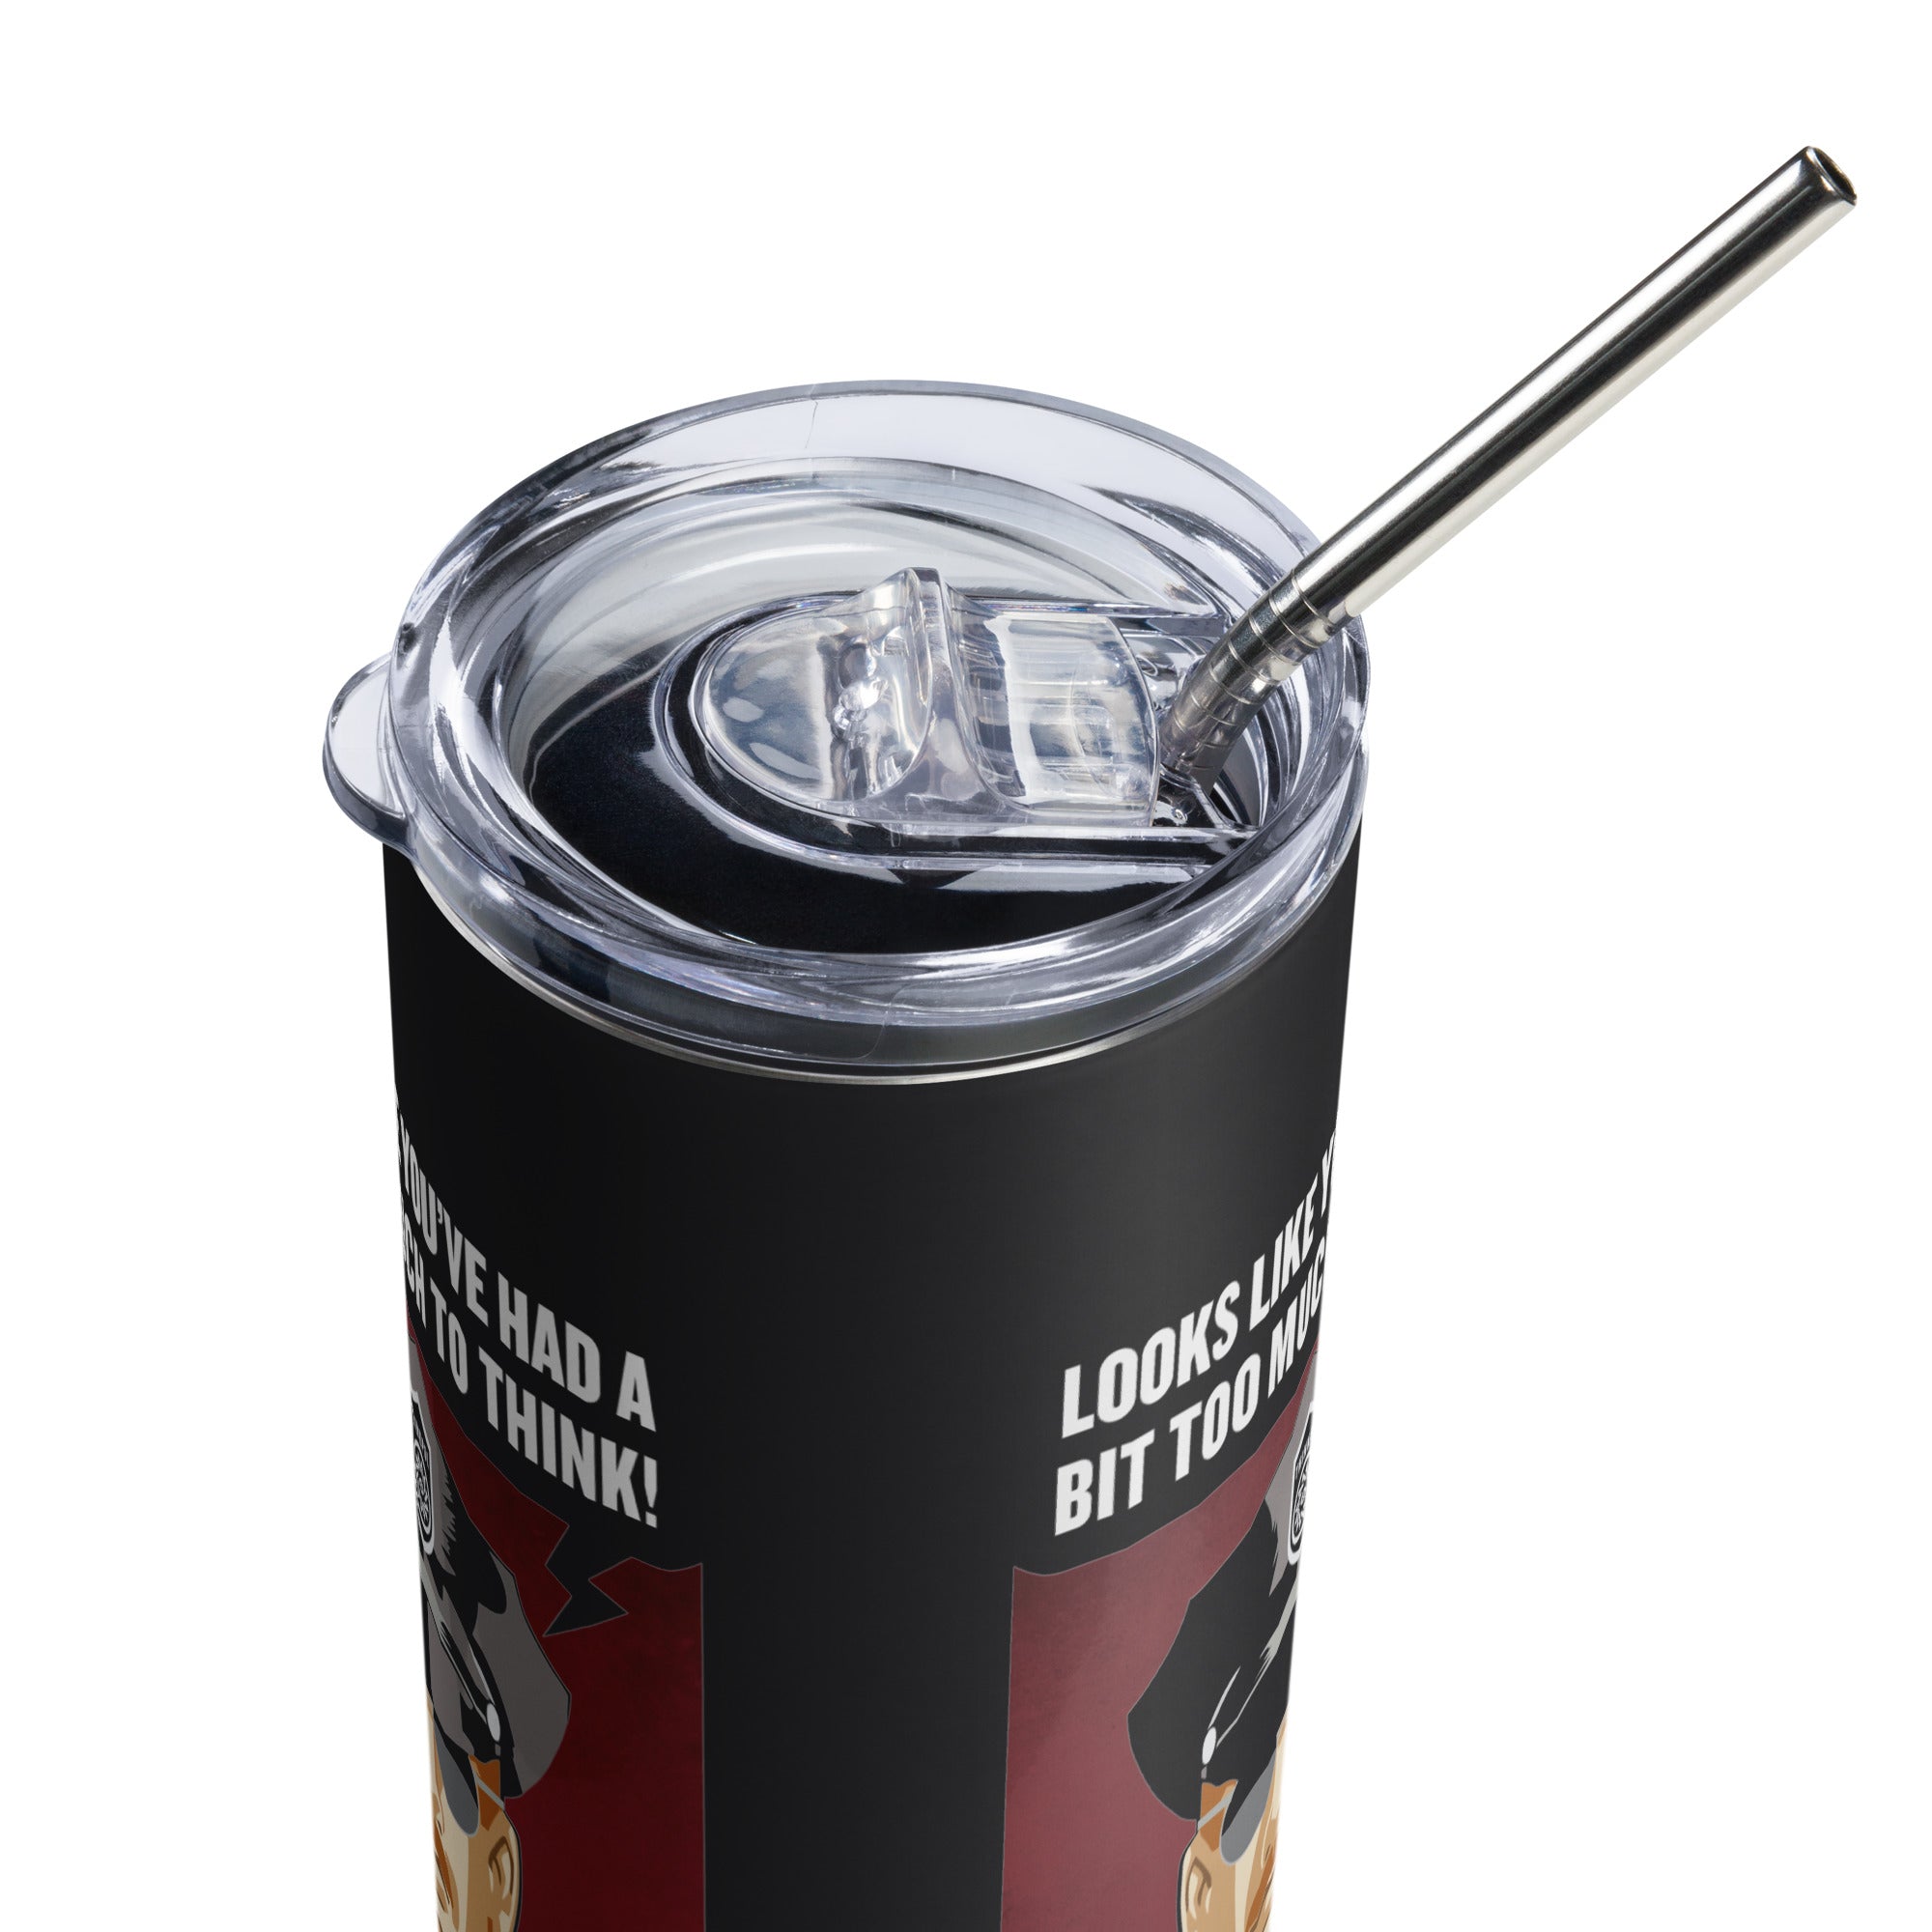 Thought Police 1984 Stainless Steel Tumbler